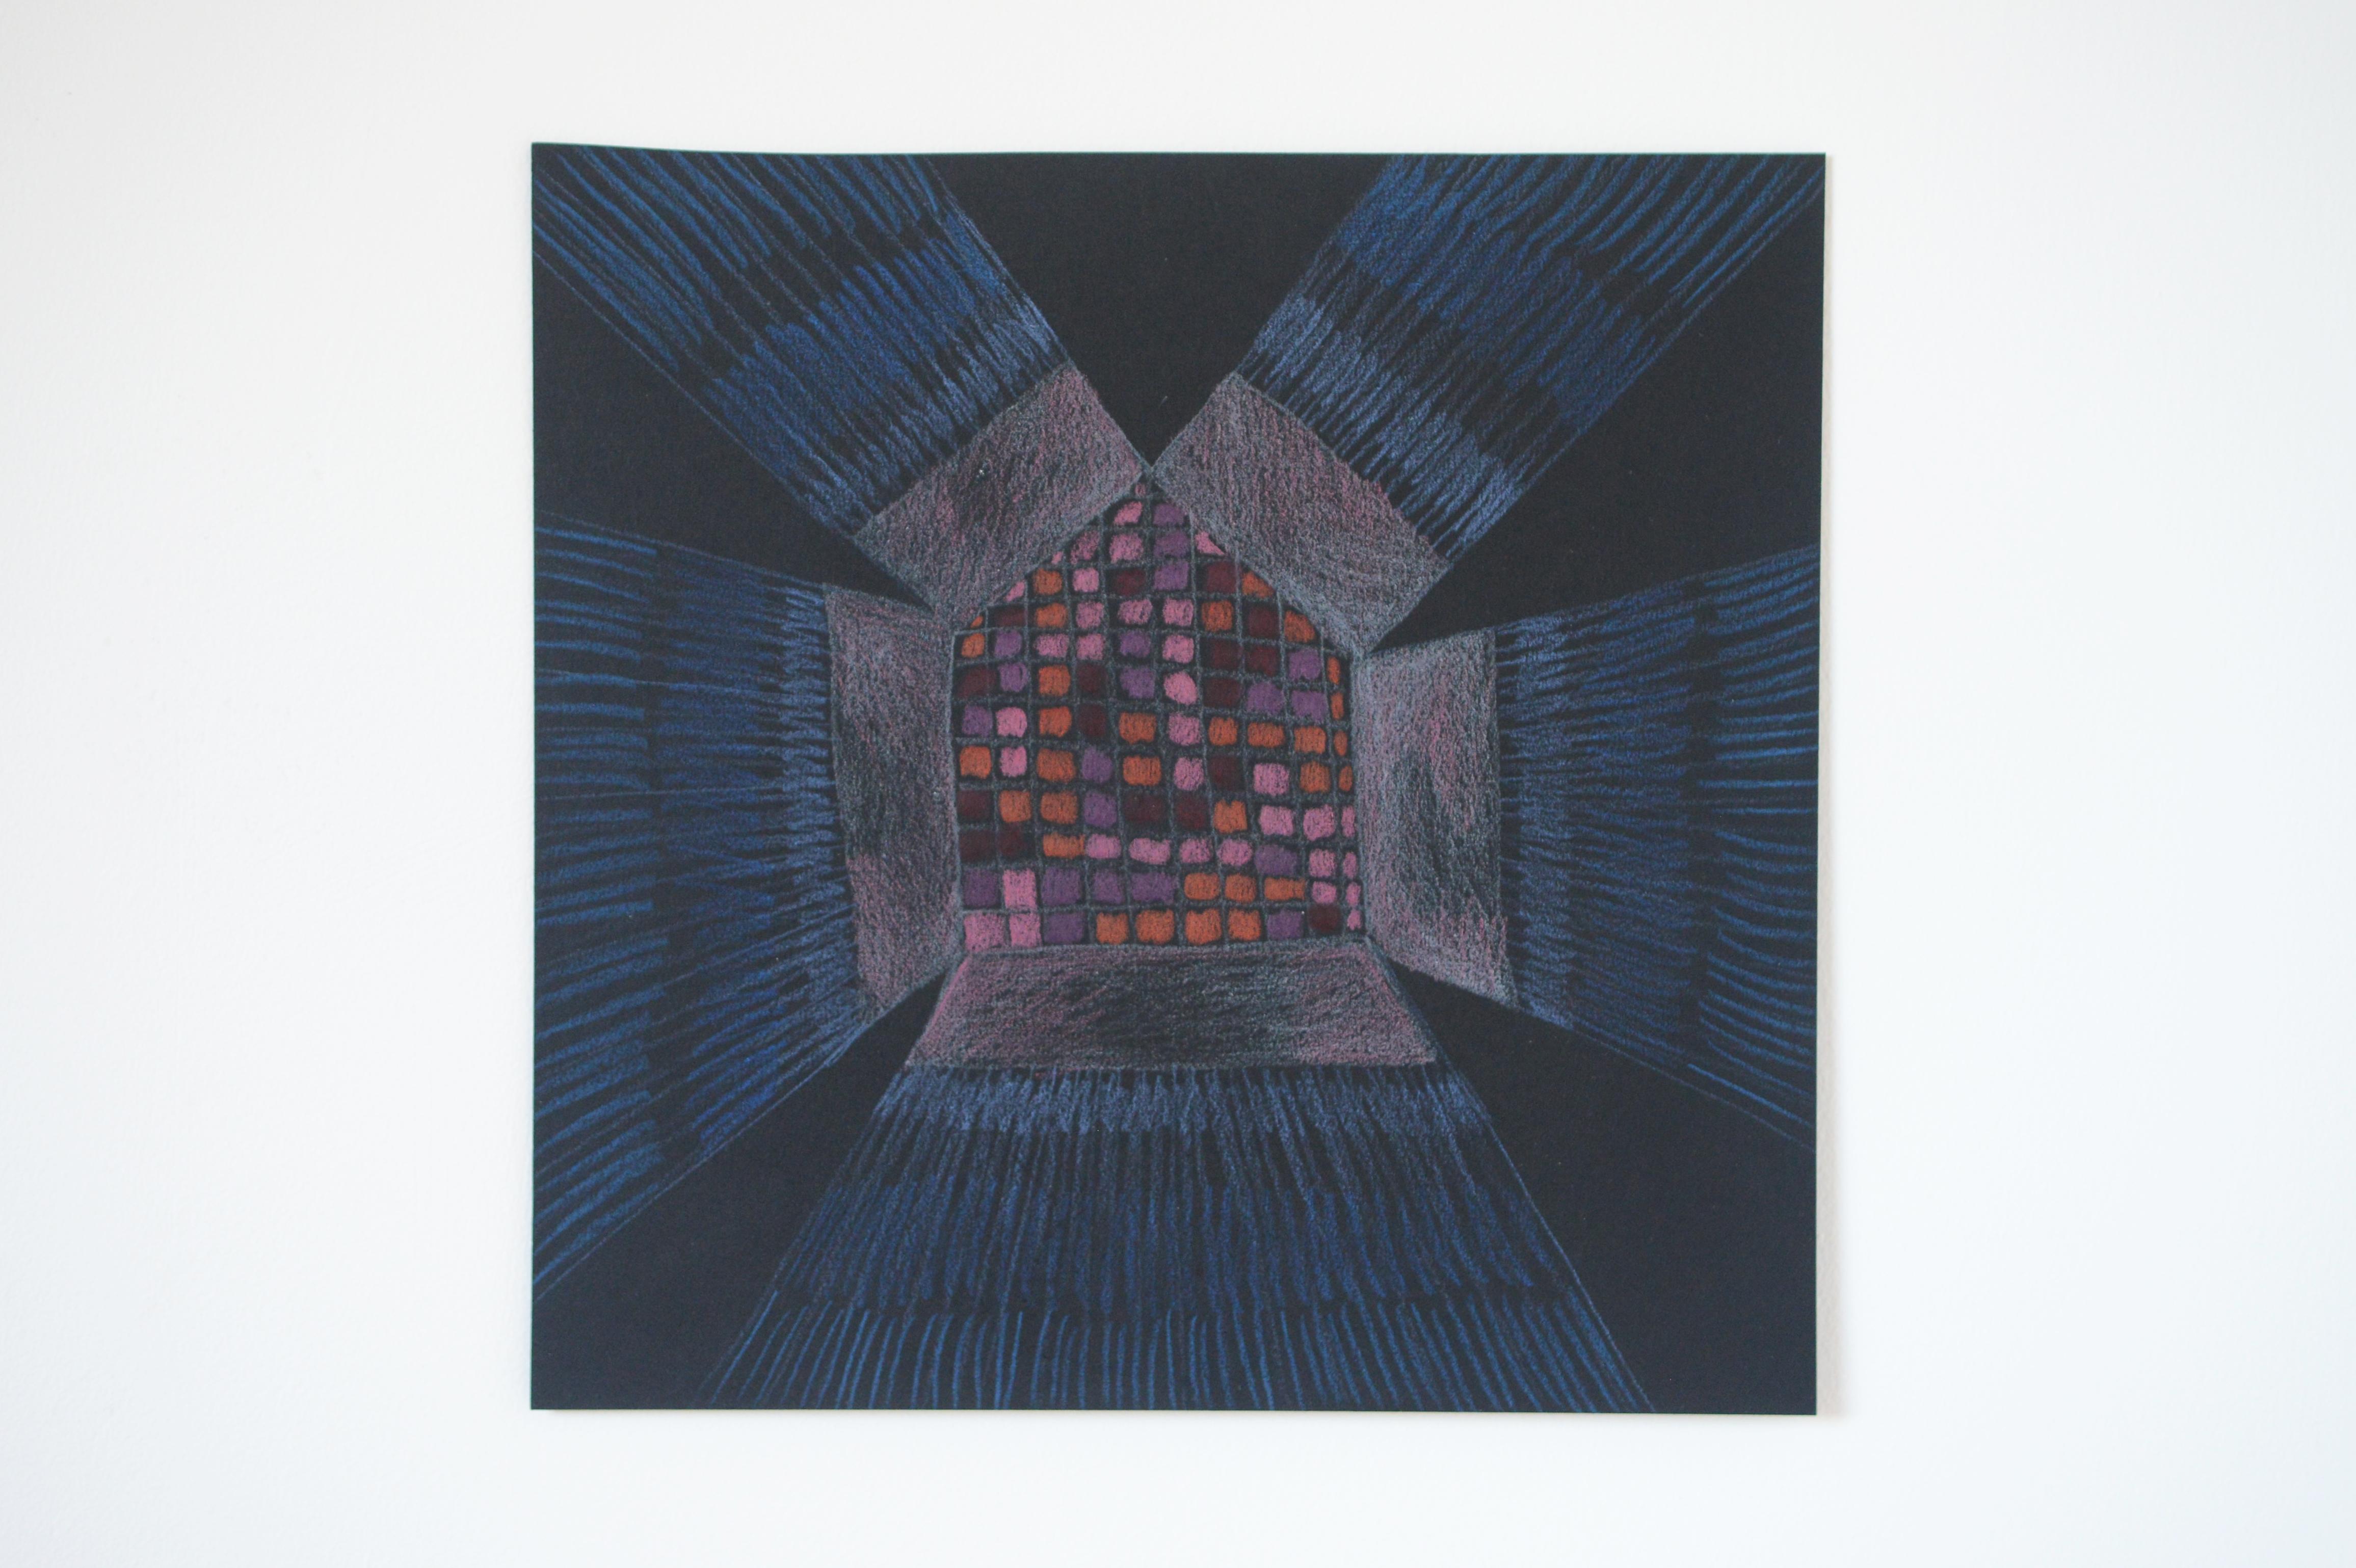 Opening Houses on Black 1, 2022. Coloured pencil on black paper, 20 x 20cm

Nicky Marais (b. 1962) is a Namibian artist, educator and activist. Marais is well-known for her abstract artworks created using a personal vocabulary of abstract forms and